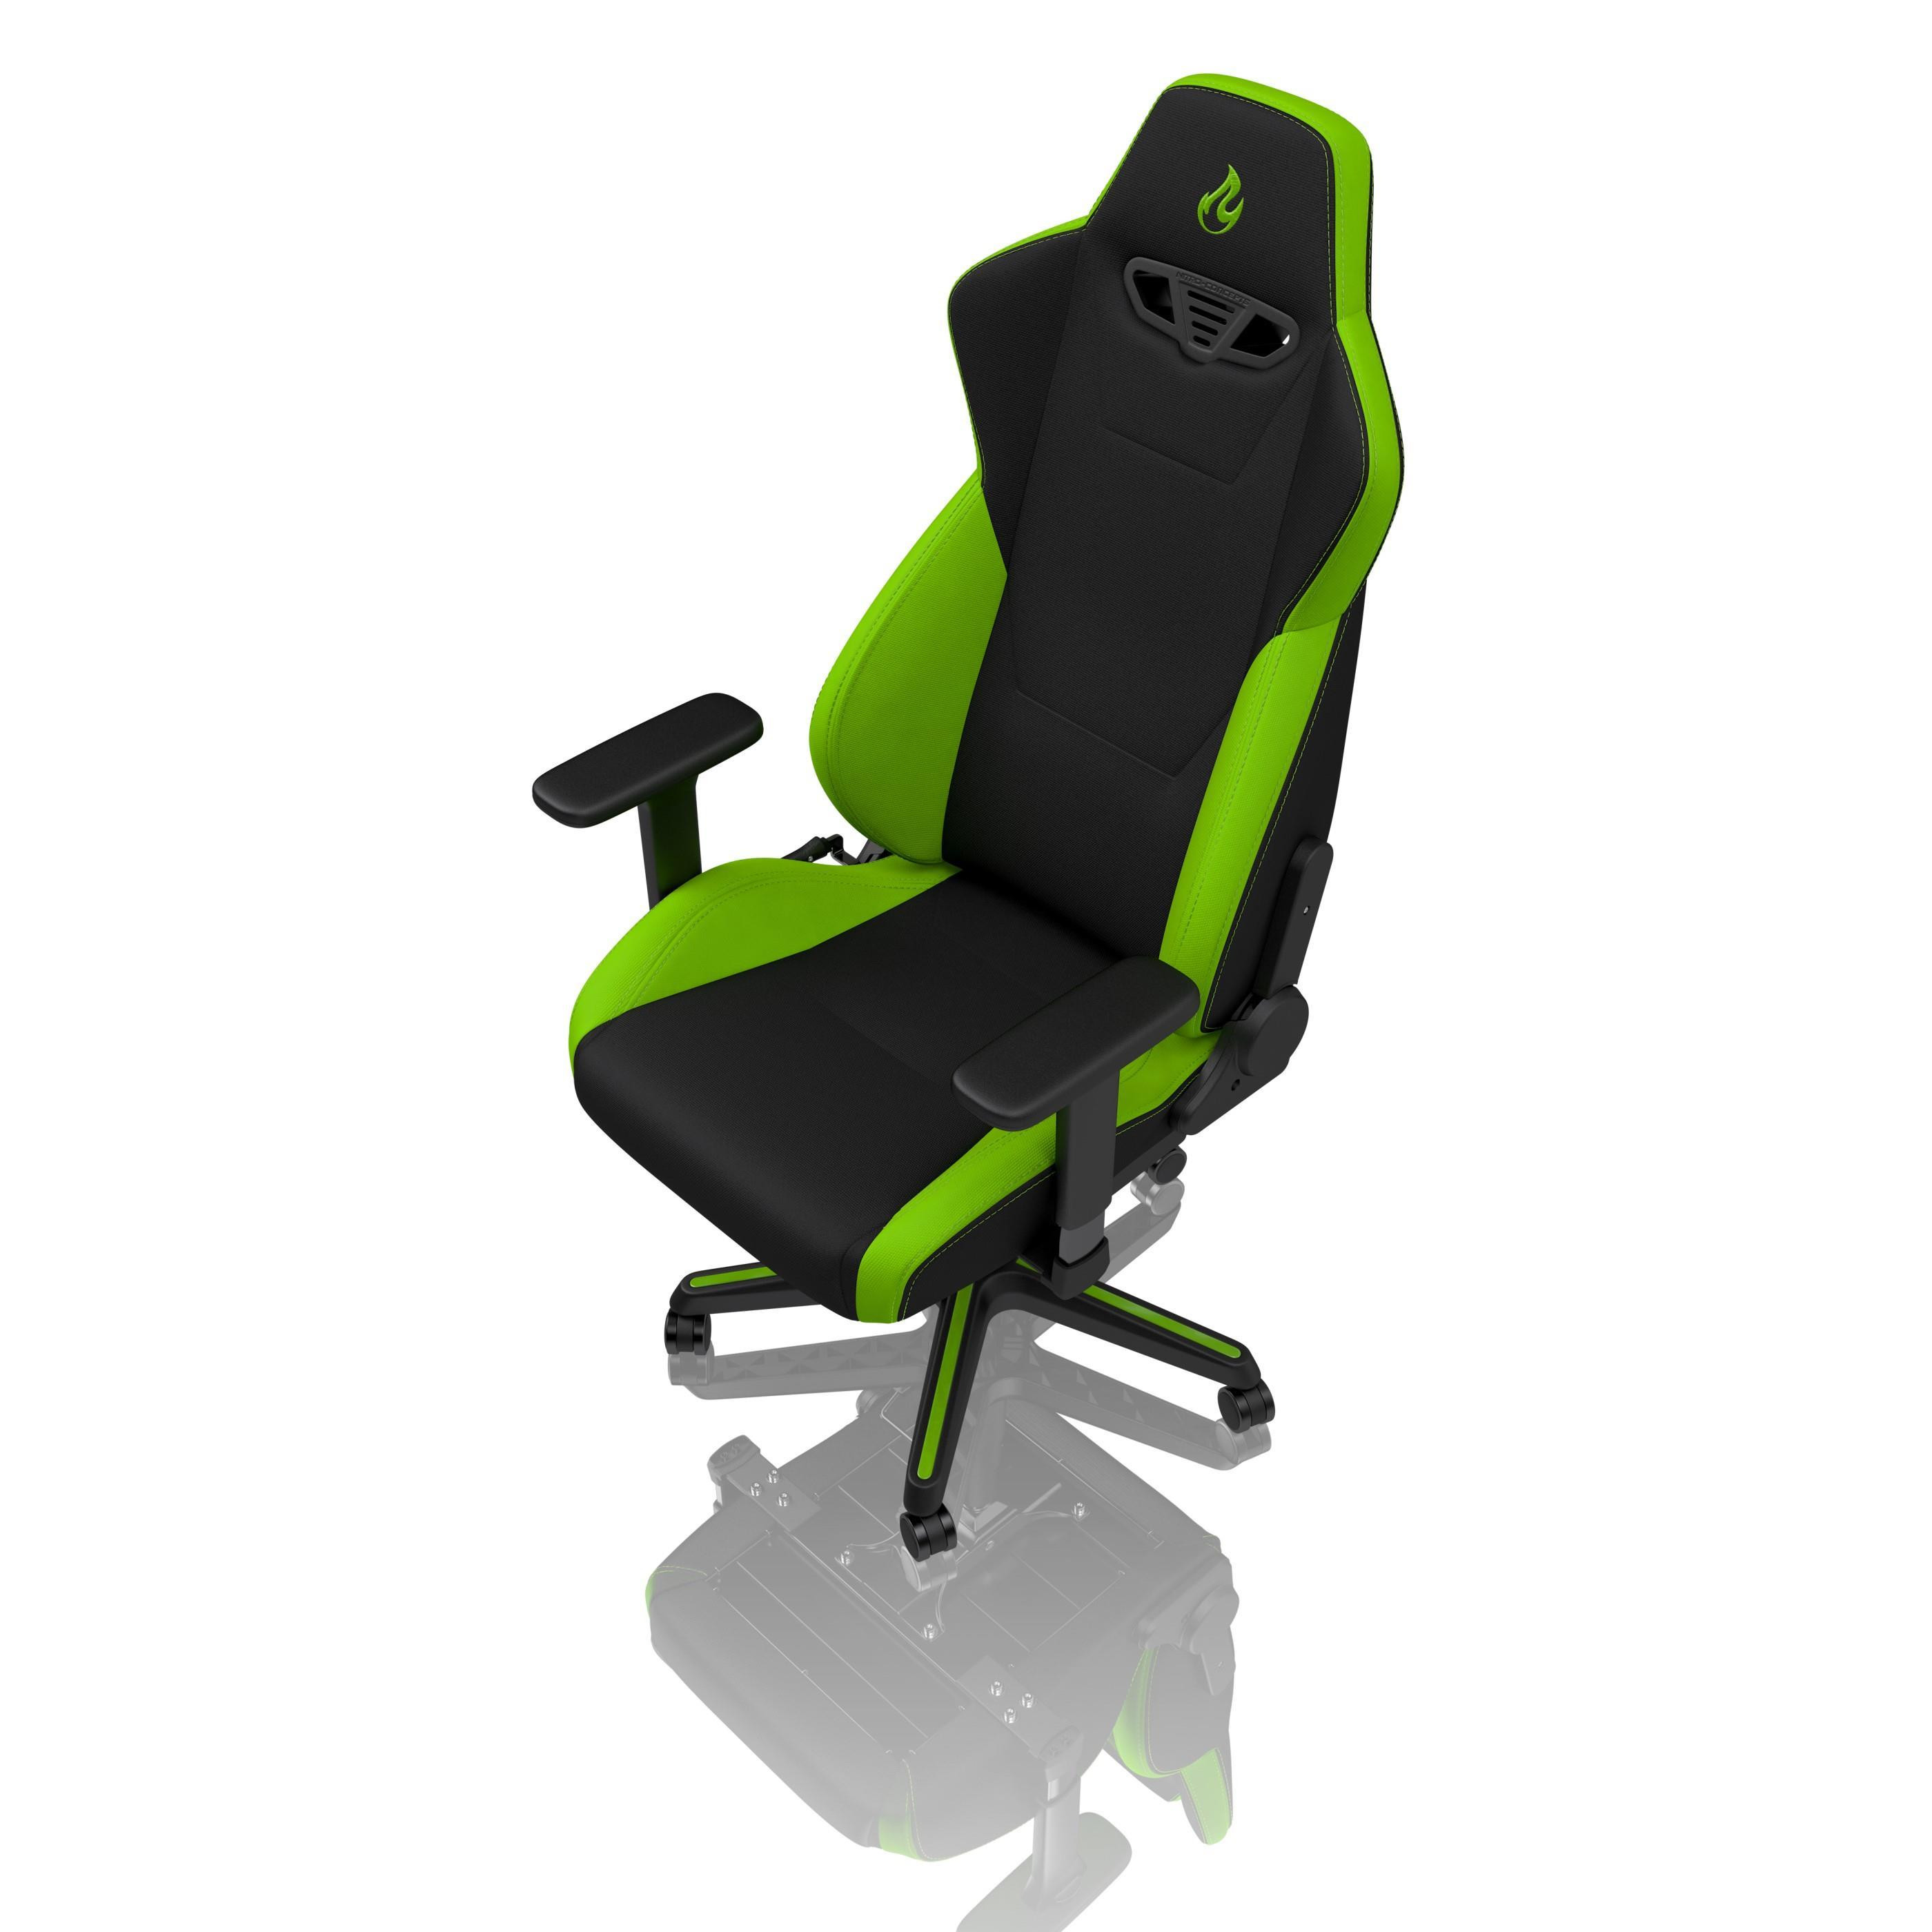 Nitro Concepts S300 Fabric Gaming Chair Atomic Green